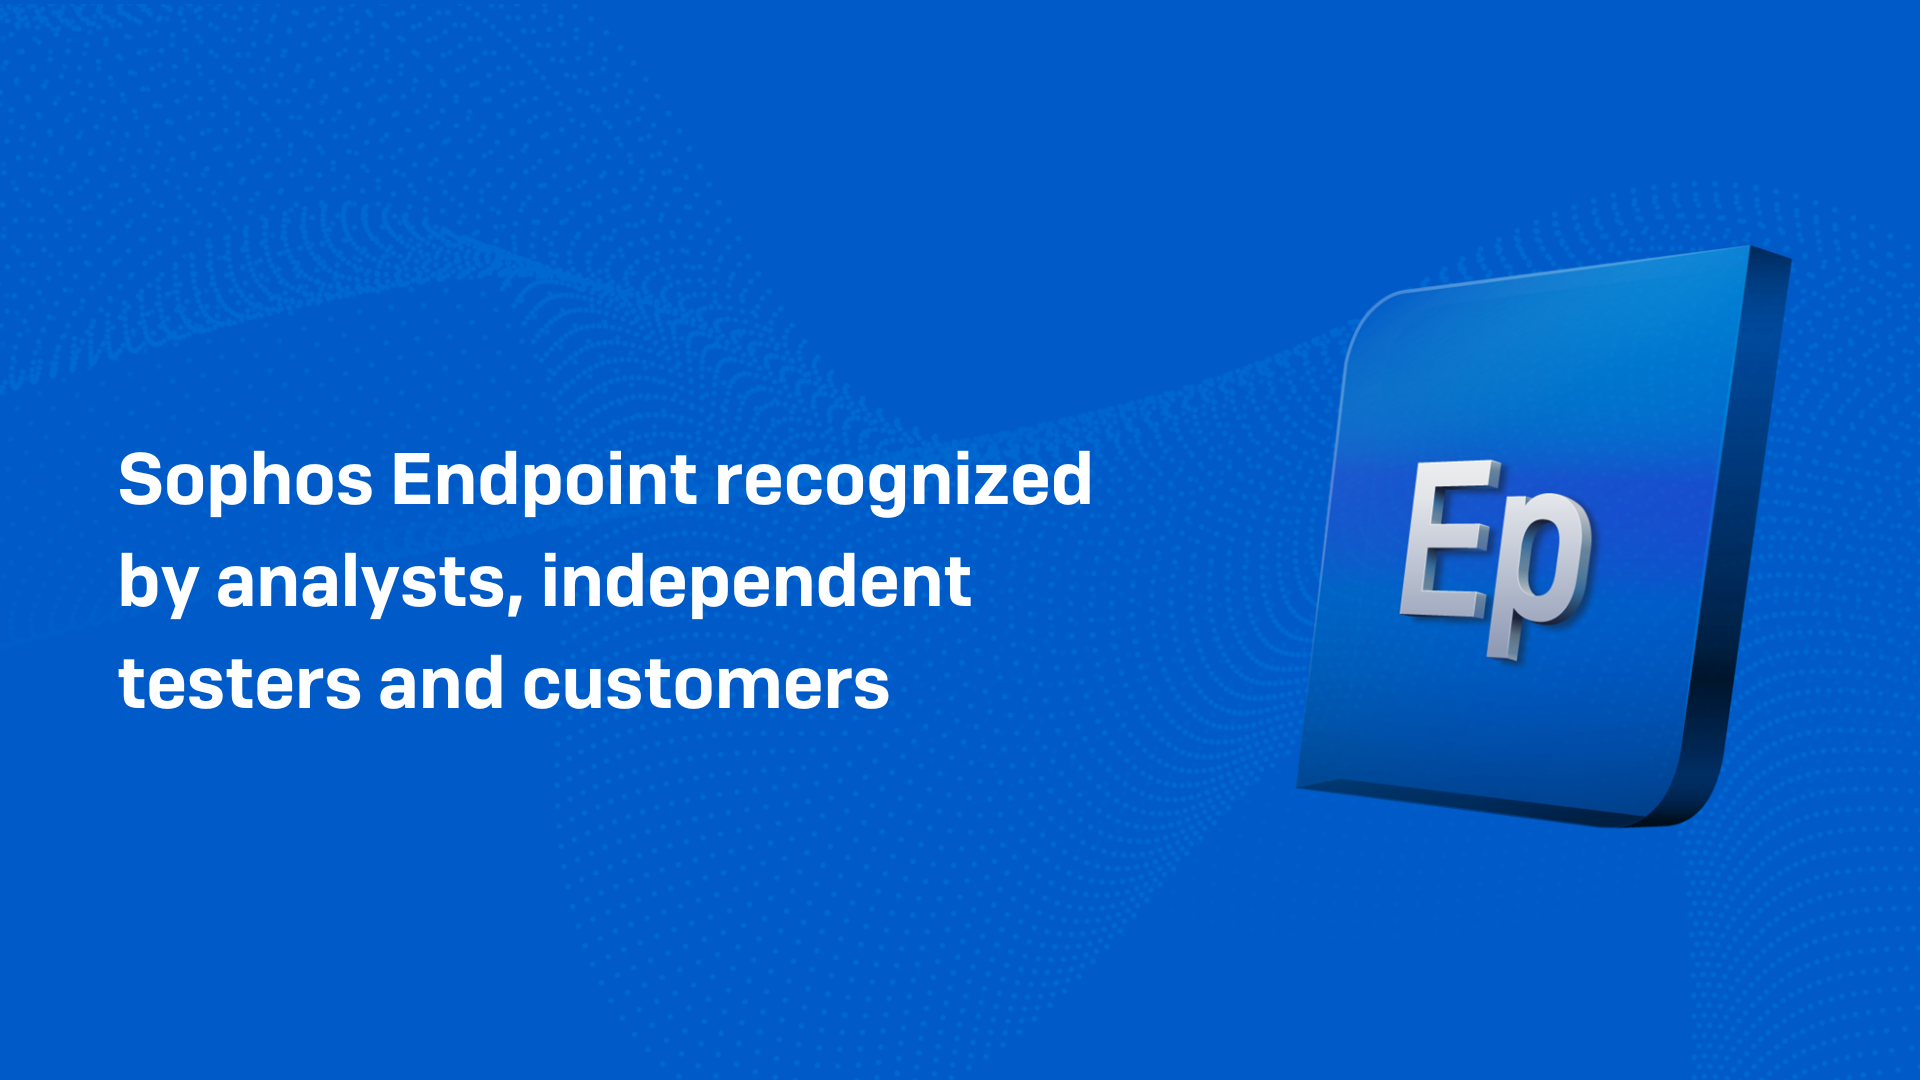 Sophos Endpoint continues to be recognized by analysts, independent testers and customers